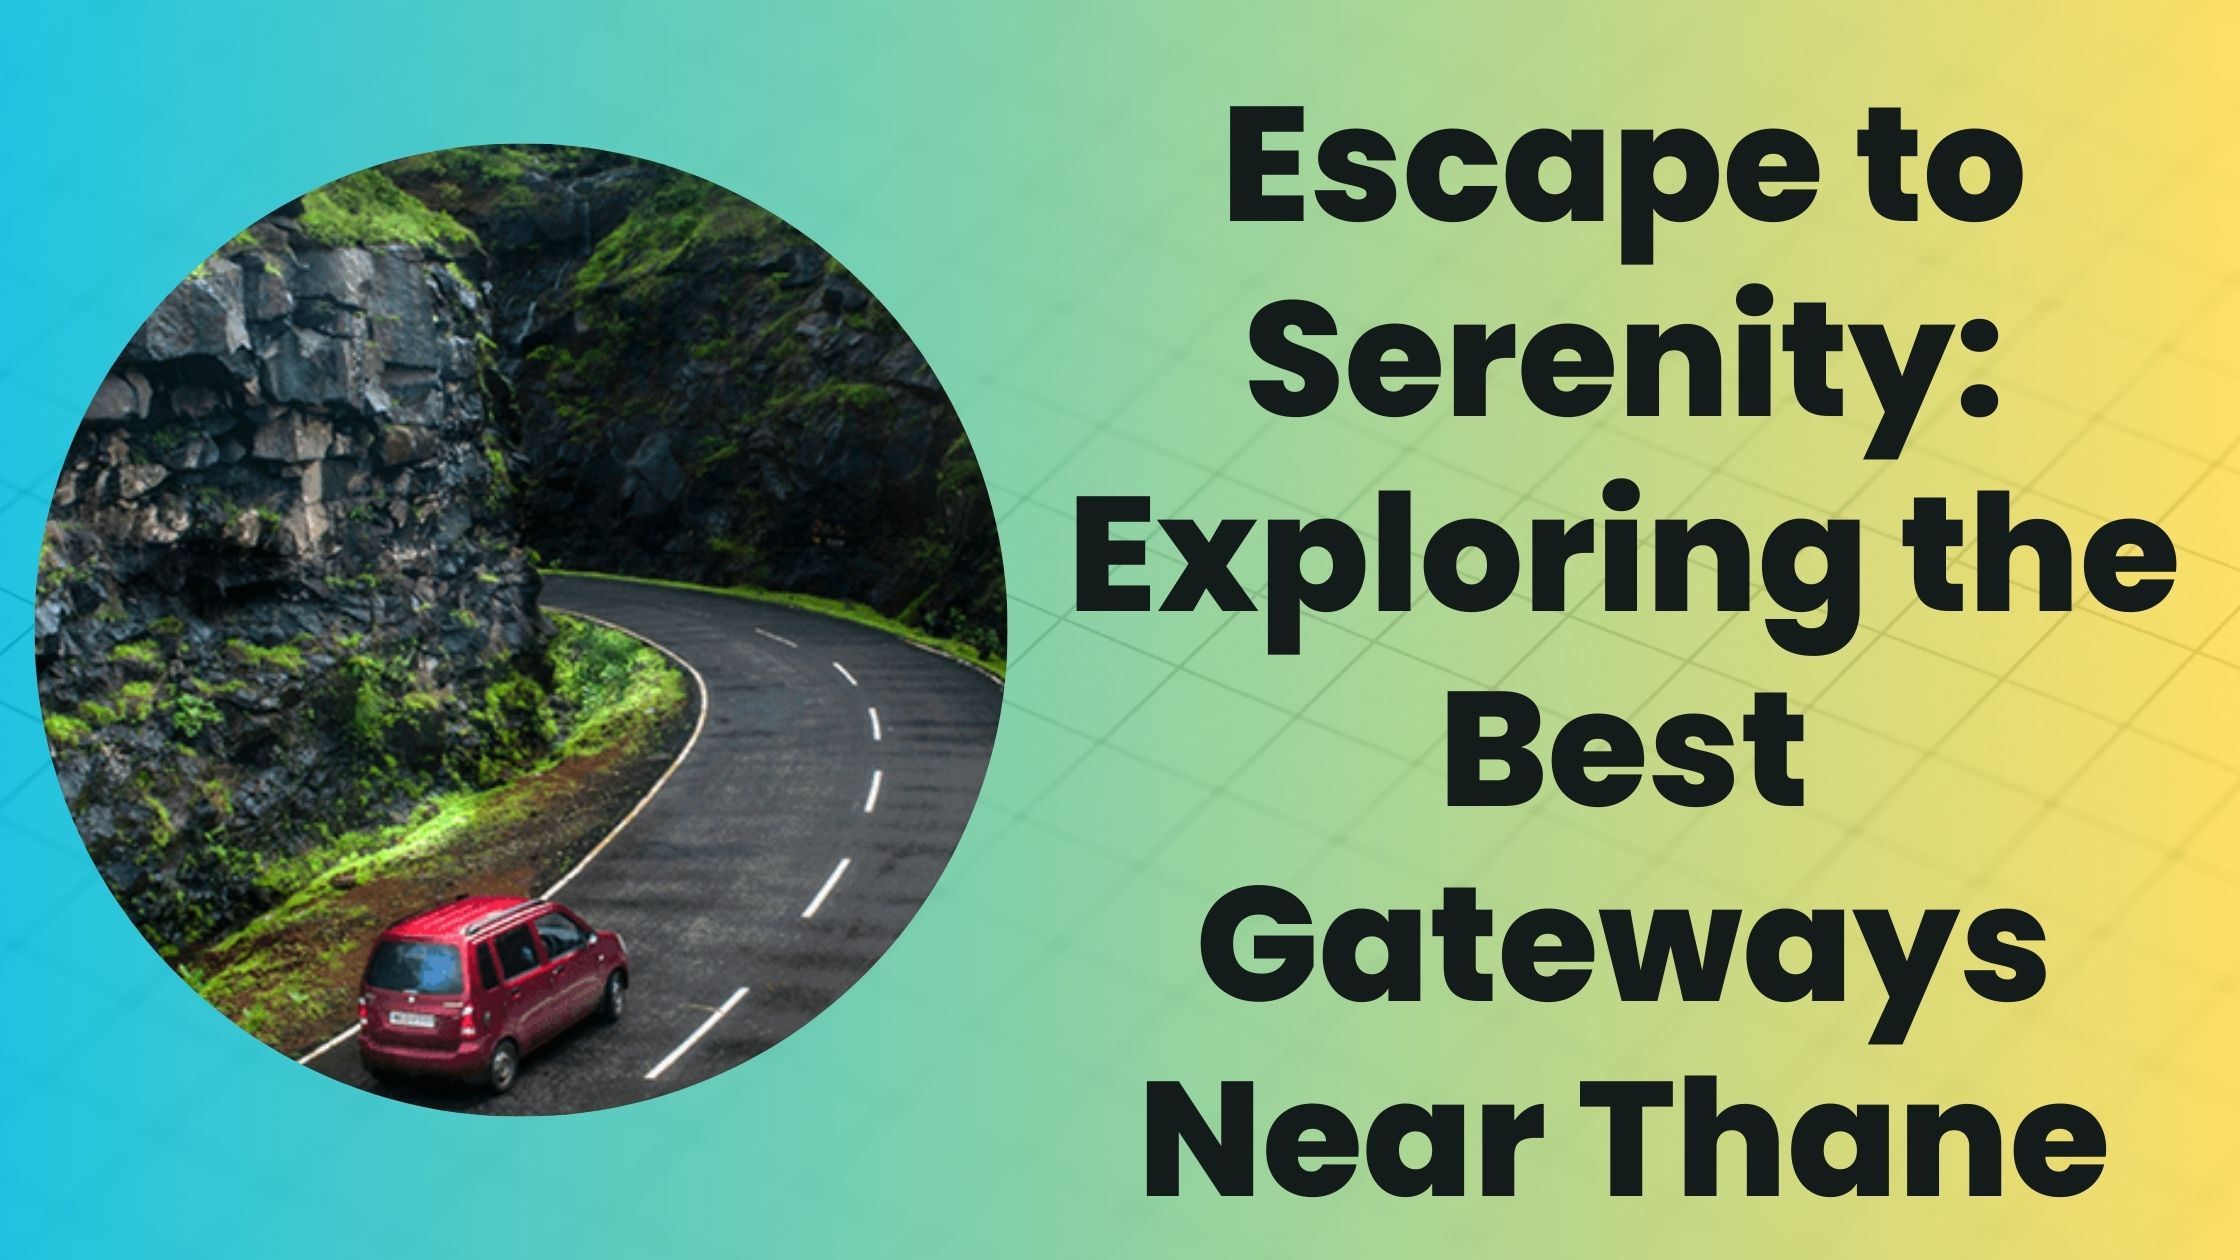 Escape to Serenity: Exploring the Best Gateways Near Thane